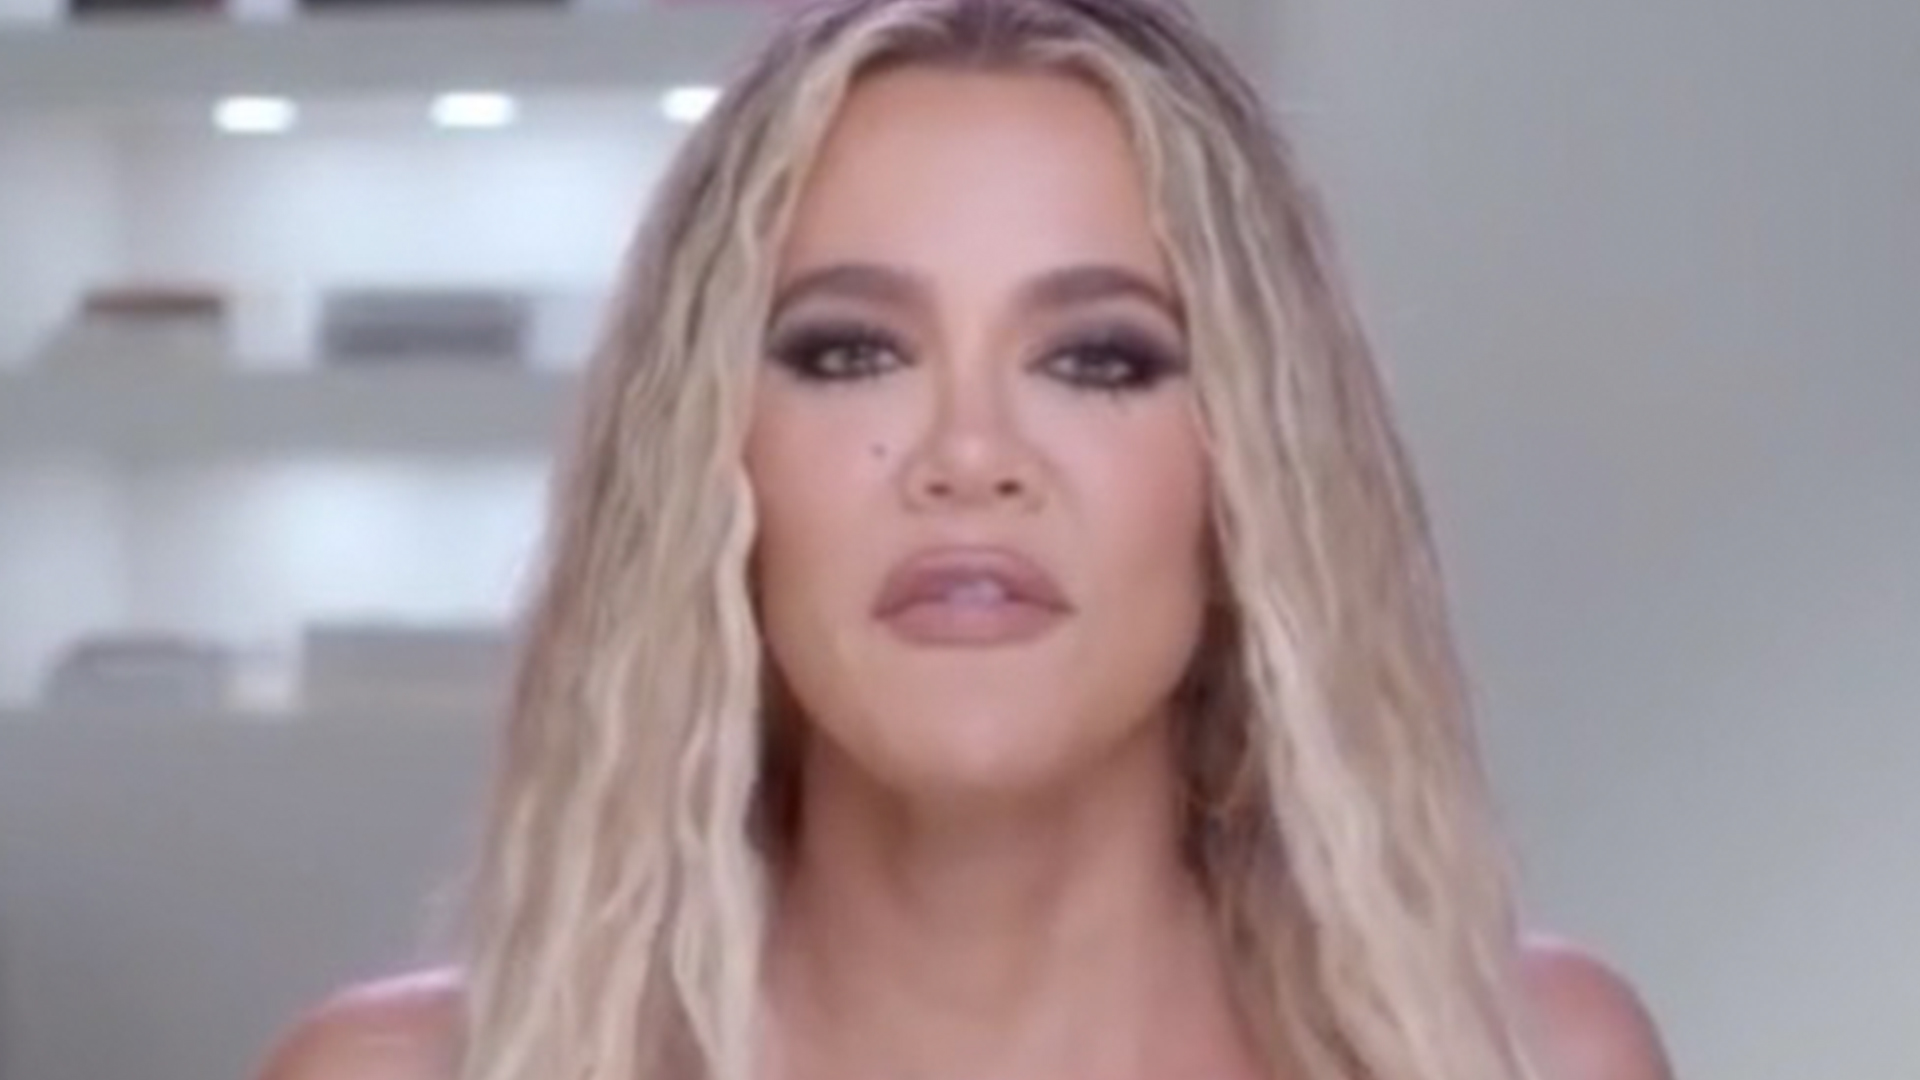 Khloe Kardashian lashes out at Kanye West in the biggest shade yet, slamming his ‘anti-Semitic slurs’ in a new post